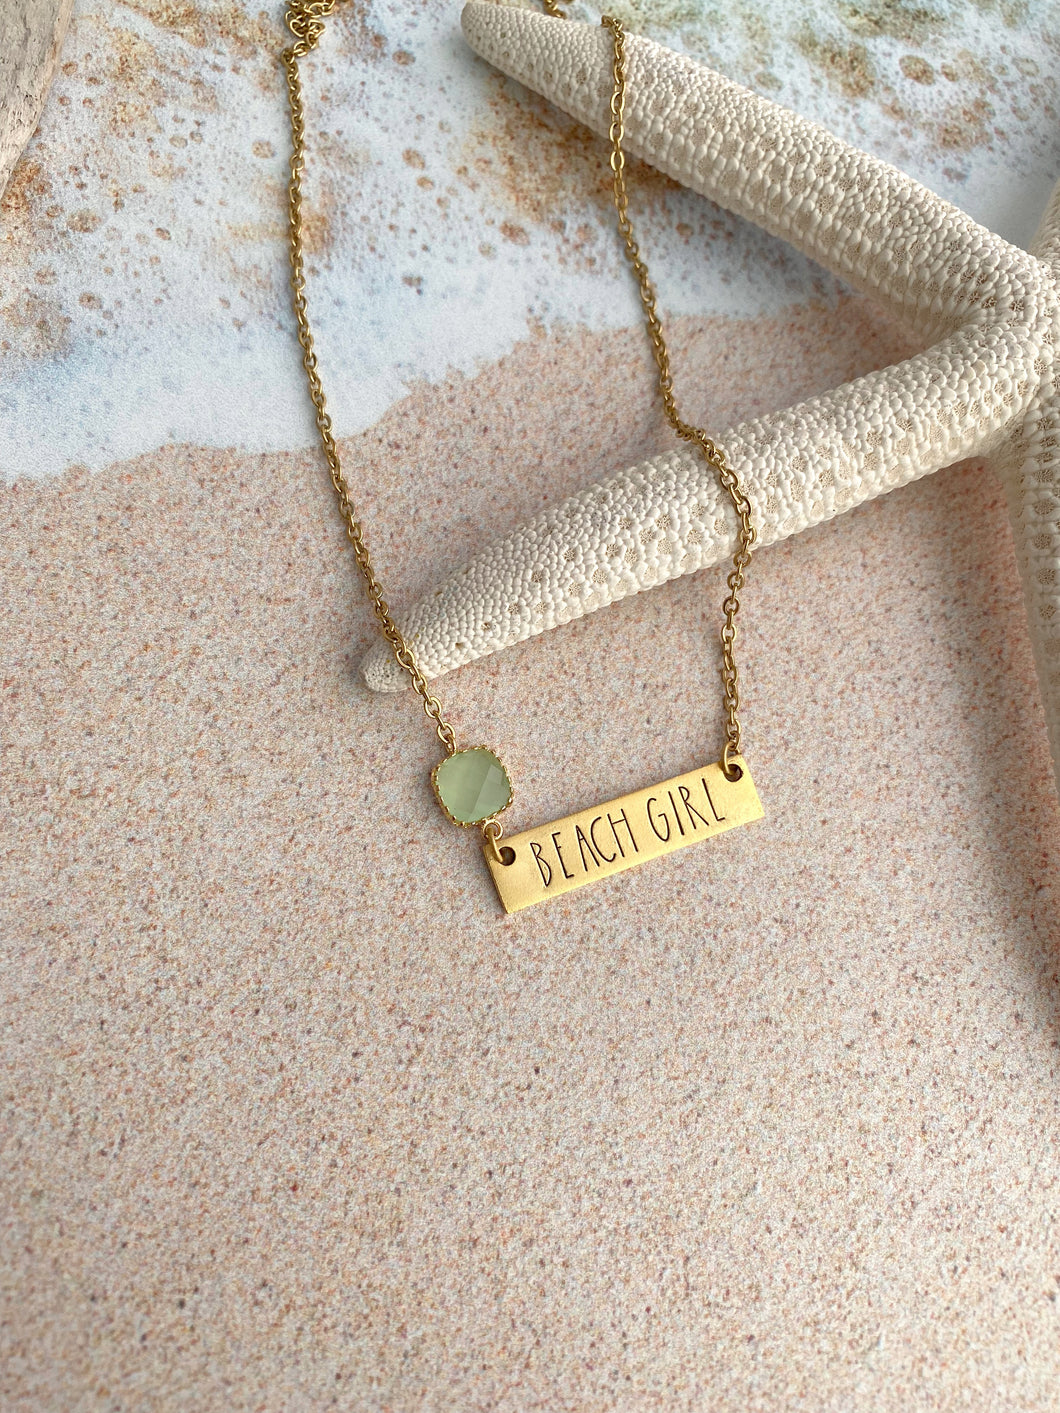 Beach girl necklace - gold pewter with seafoam glass gem - horizontal bar necklace